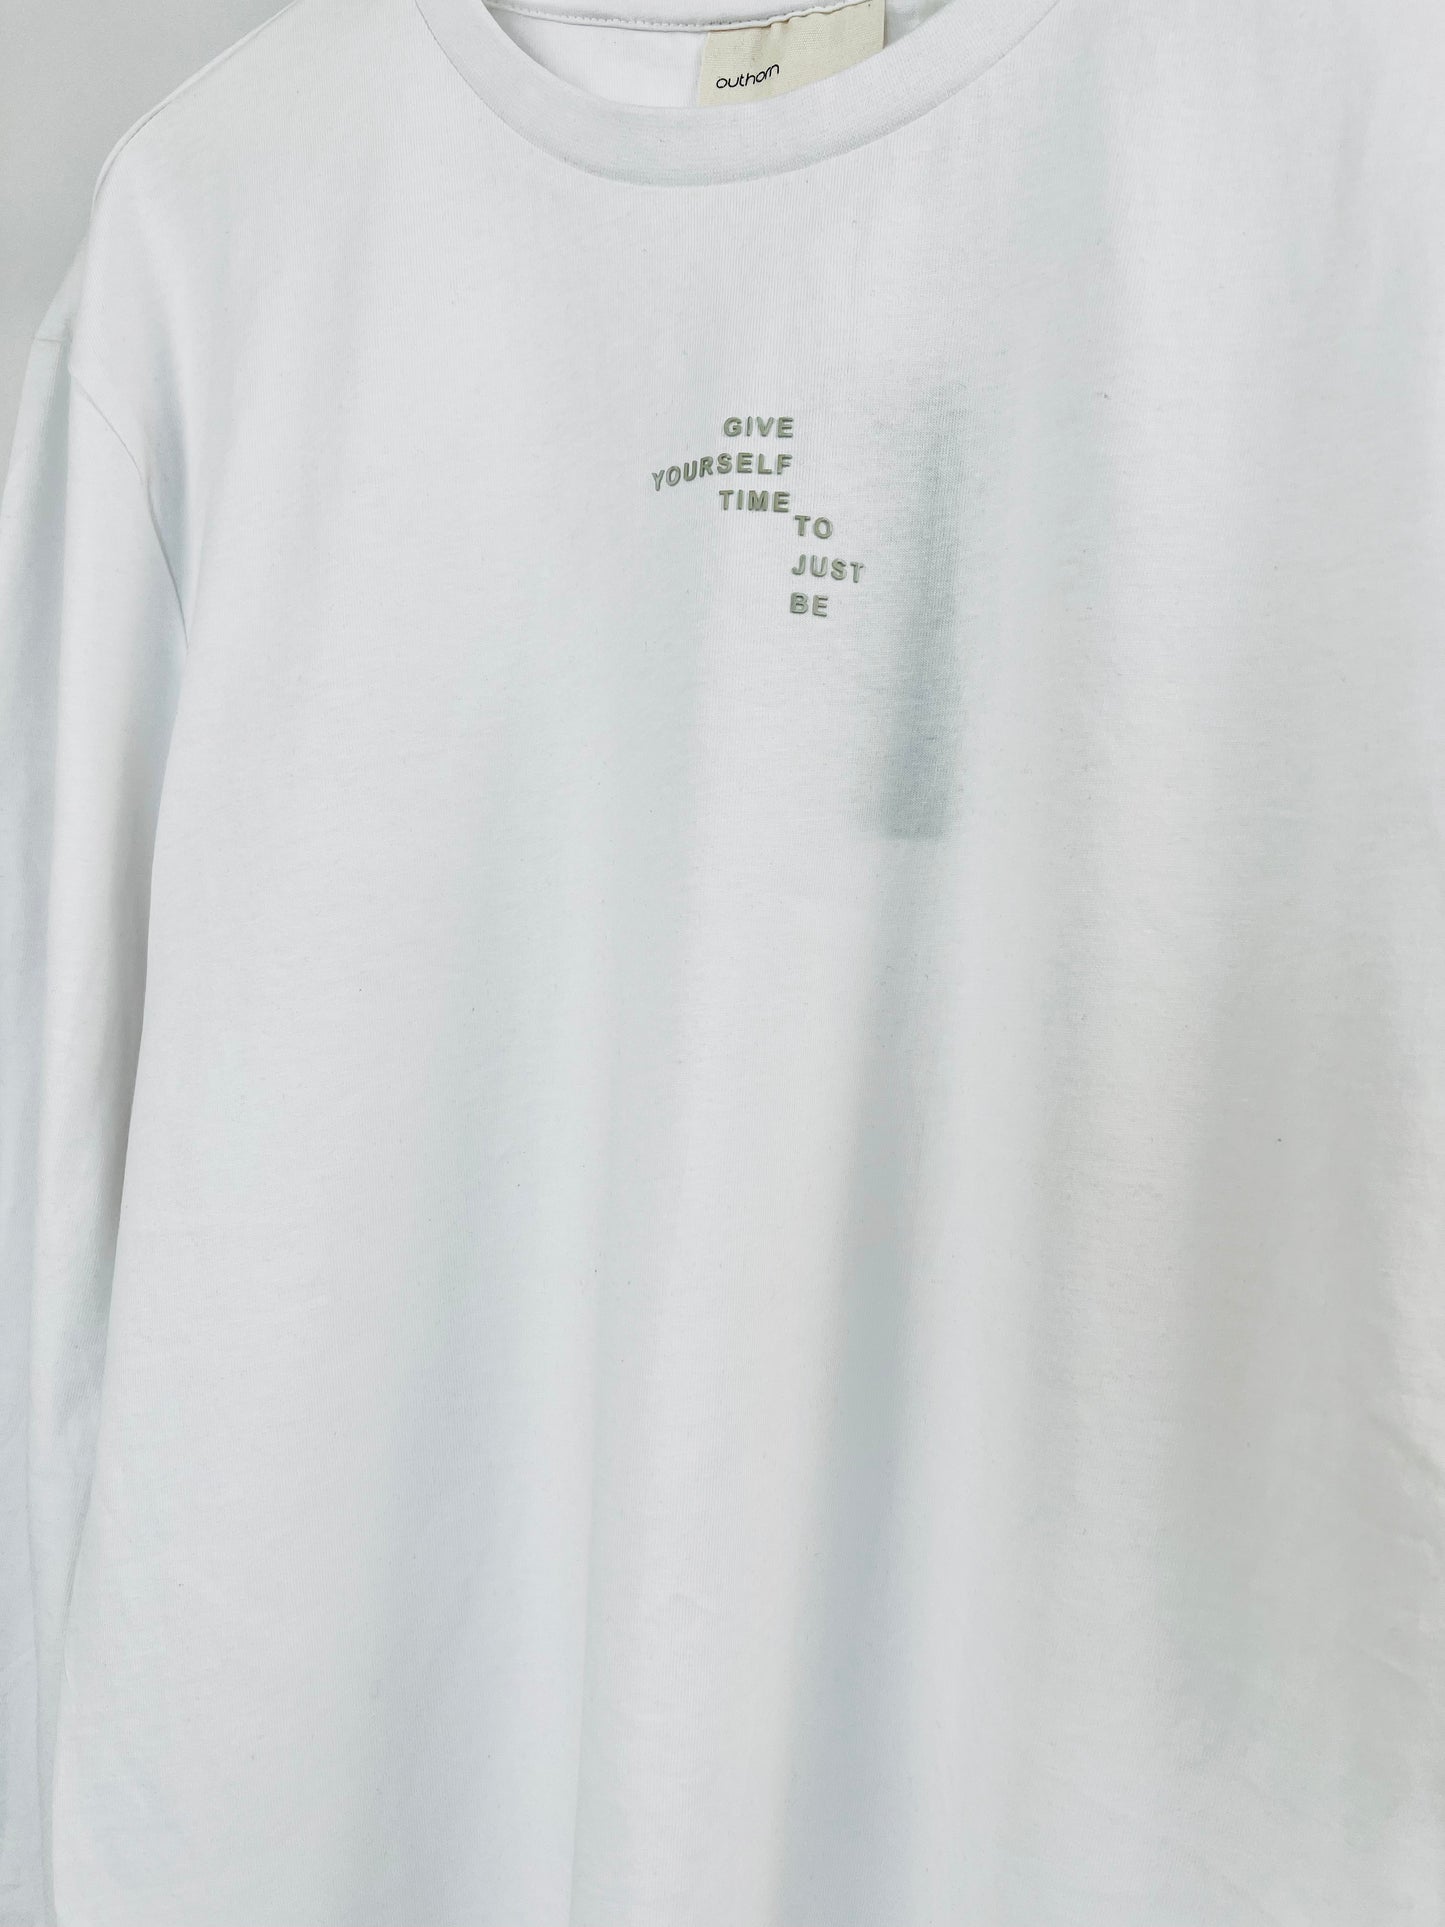 Outhorn Bialy Home longsleeve T-shirt in white